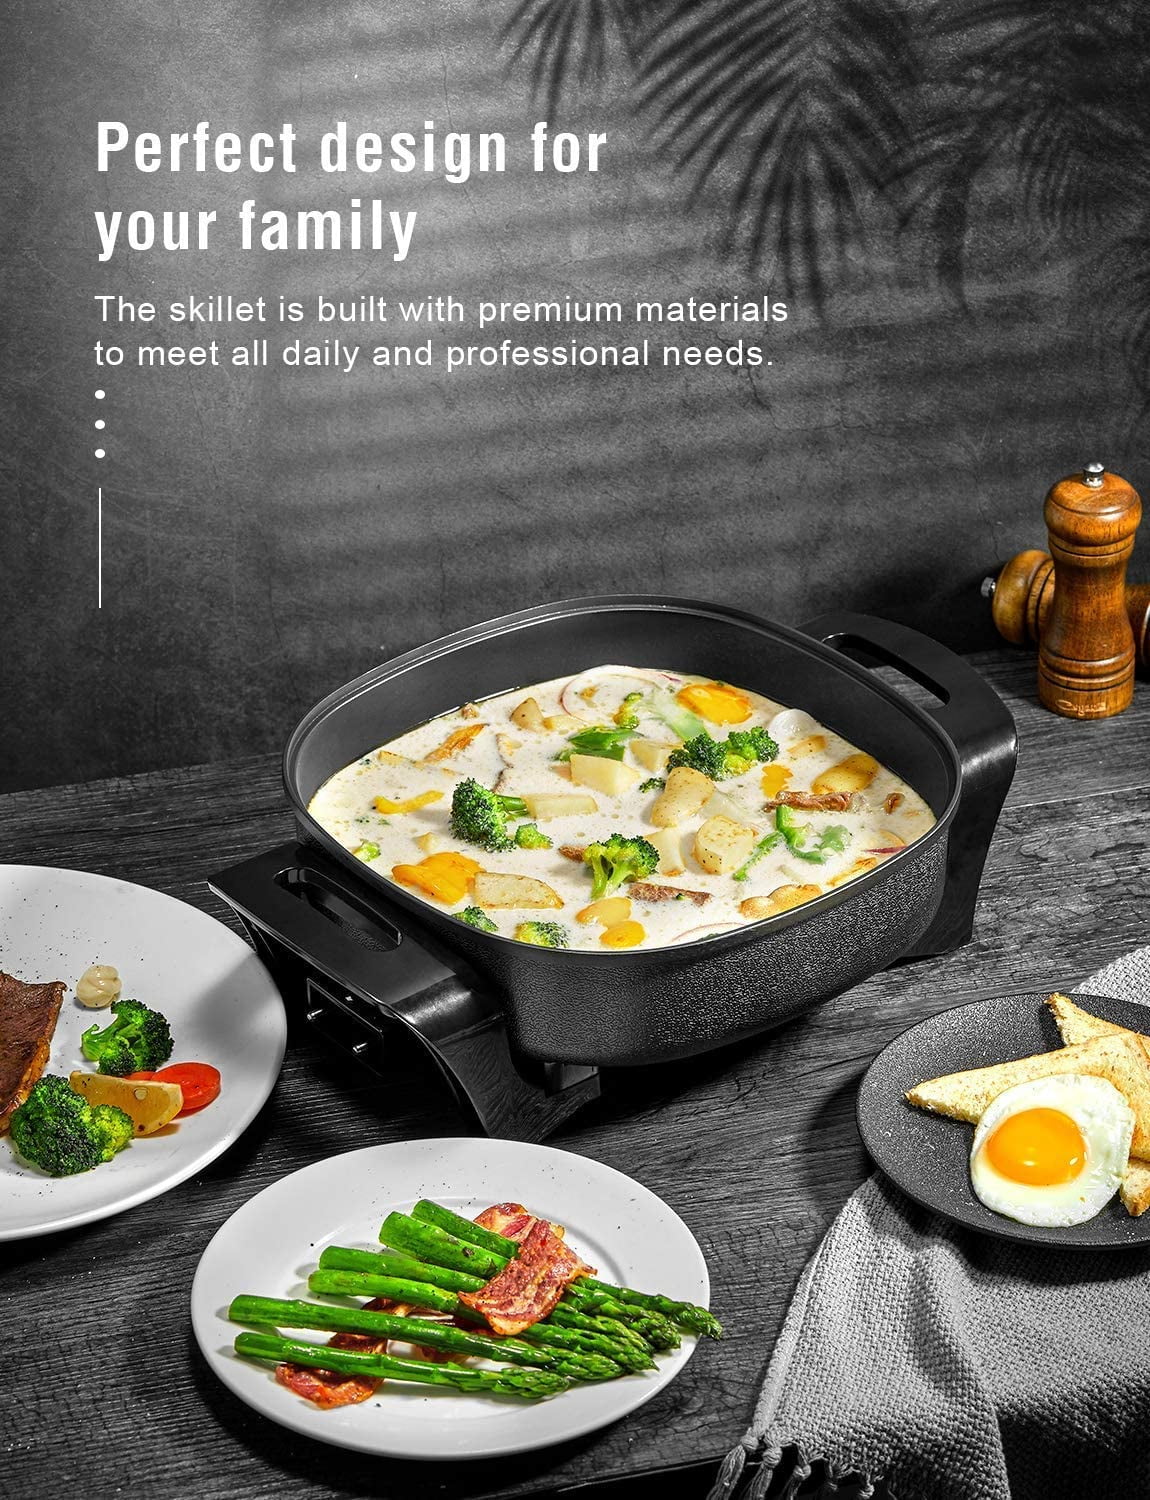 Electric Skillet, 12 Inch Deep Non Stick Electric Frying Pan with Standable  Glass Lid, 3 Marked Heating Levels, Heat Resistant Handles and Dishwasher